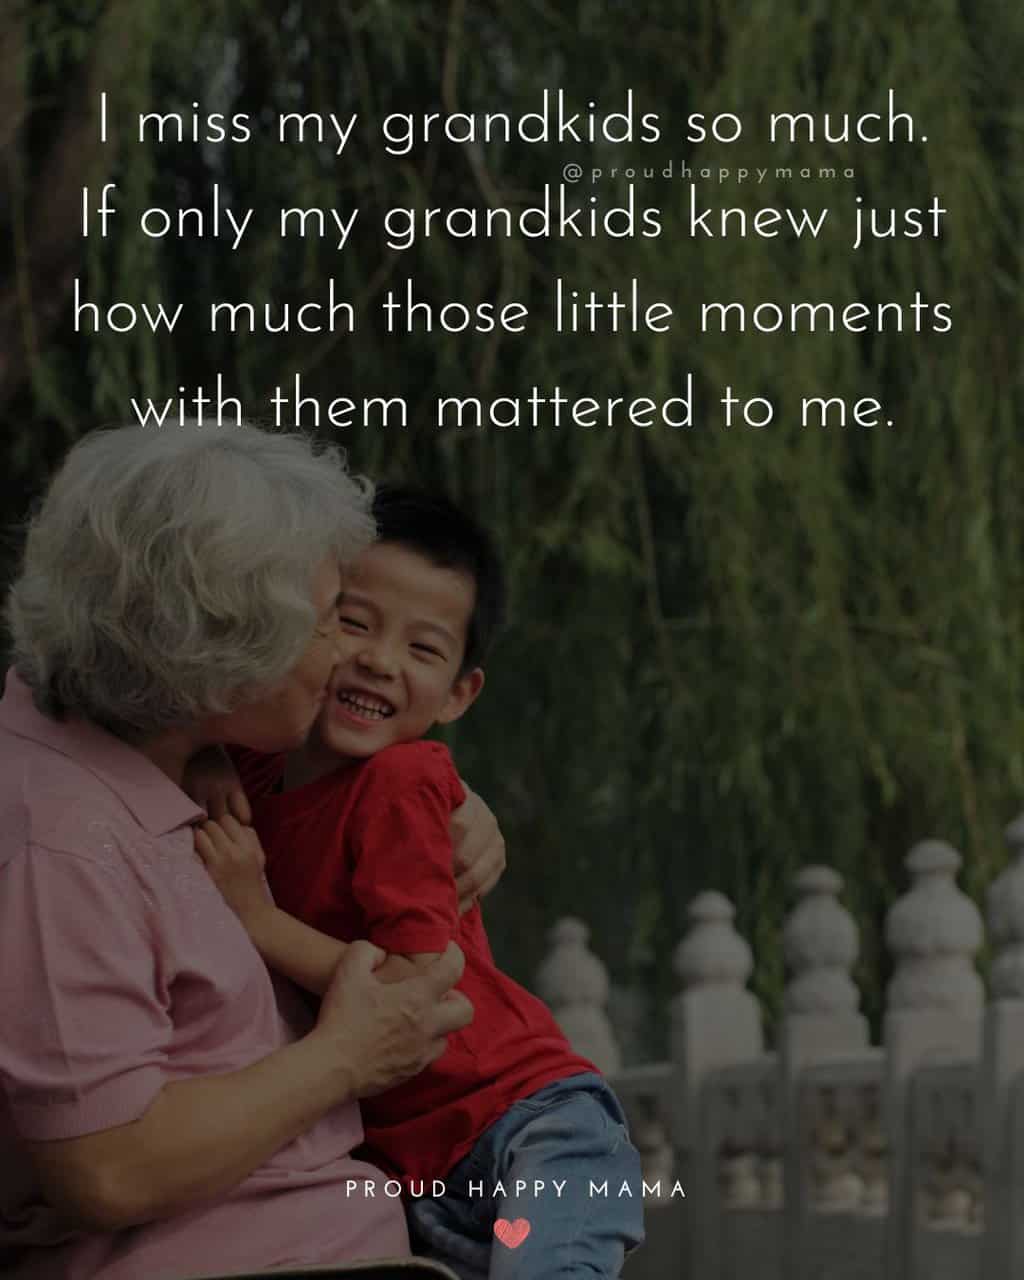 I miss my grandkids so much. If only my grandkids knew just how much those little moments with them mattered to me.